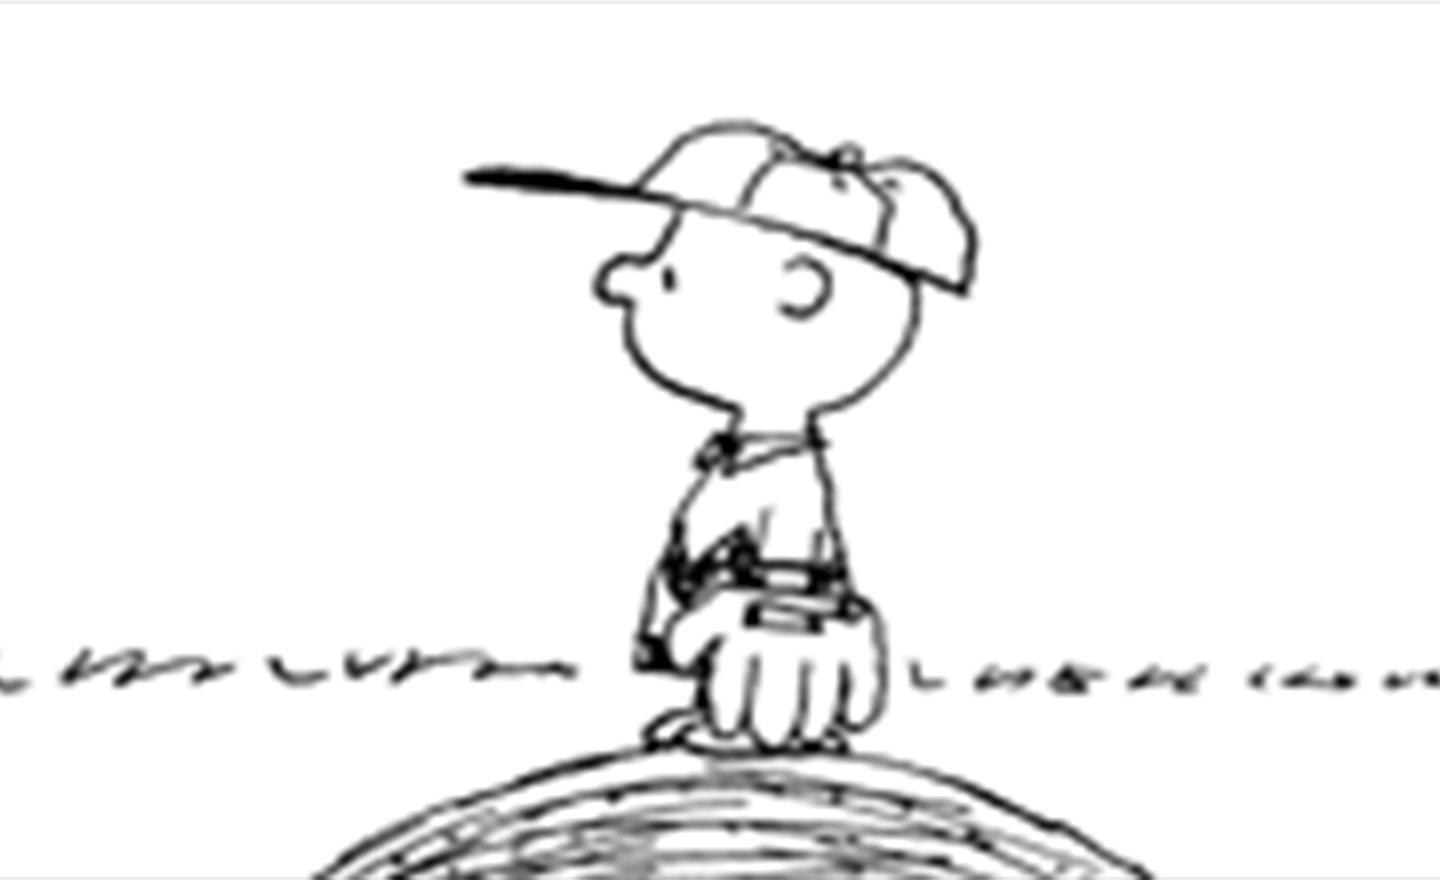 Official Peanuts Charlie Brown And Snoopy Playing Baseball Boston